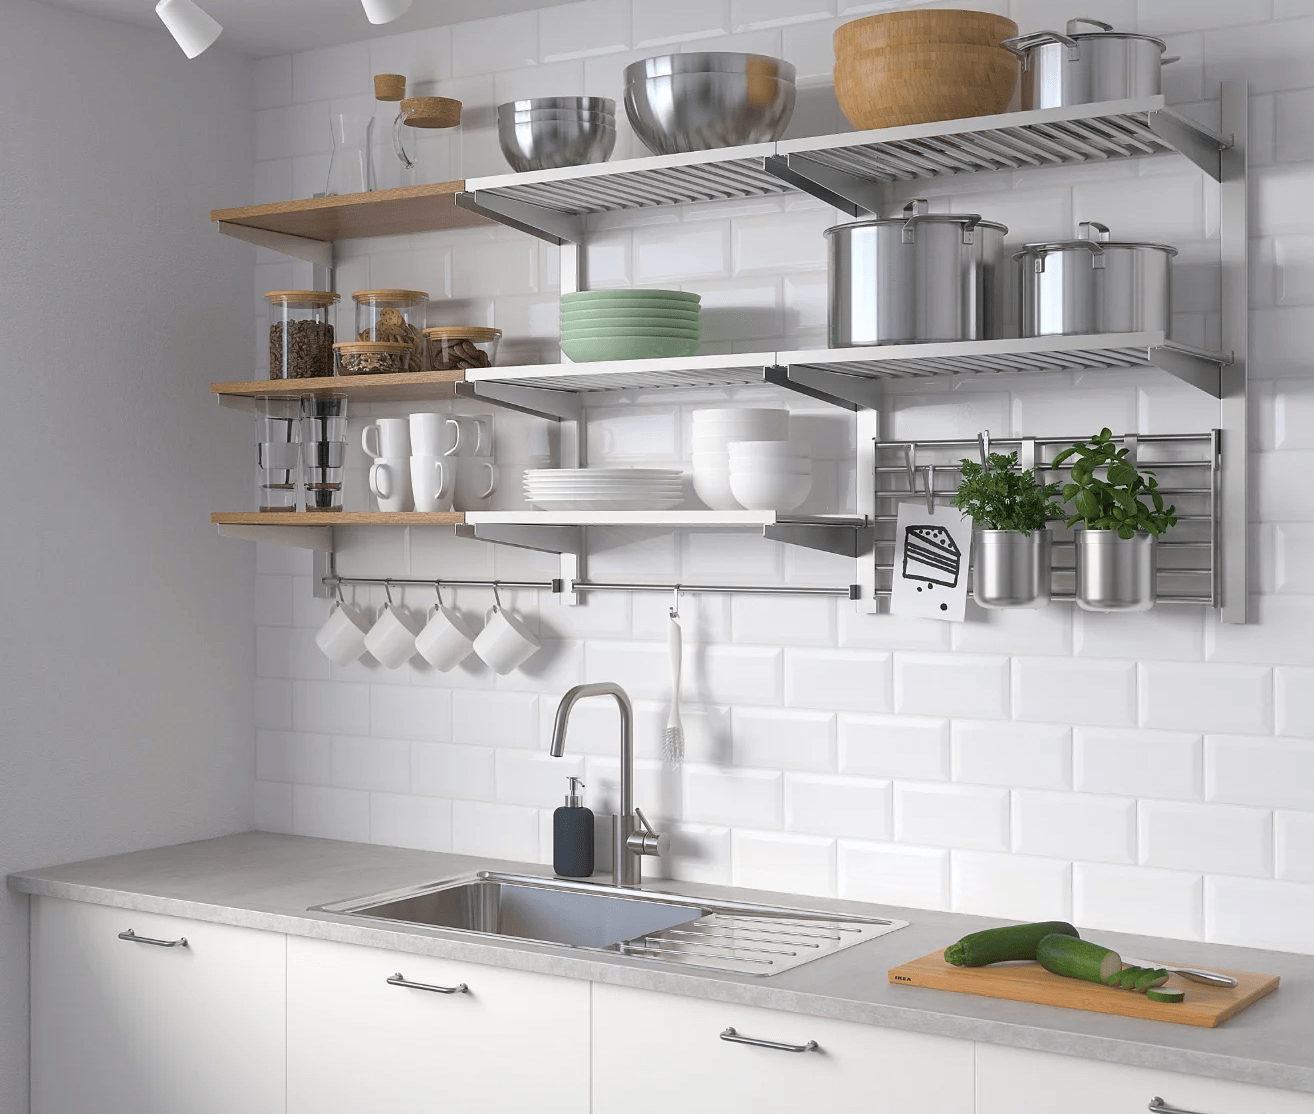 5 Reasons For Using Ikea Shelving Systems in Your Kitchen